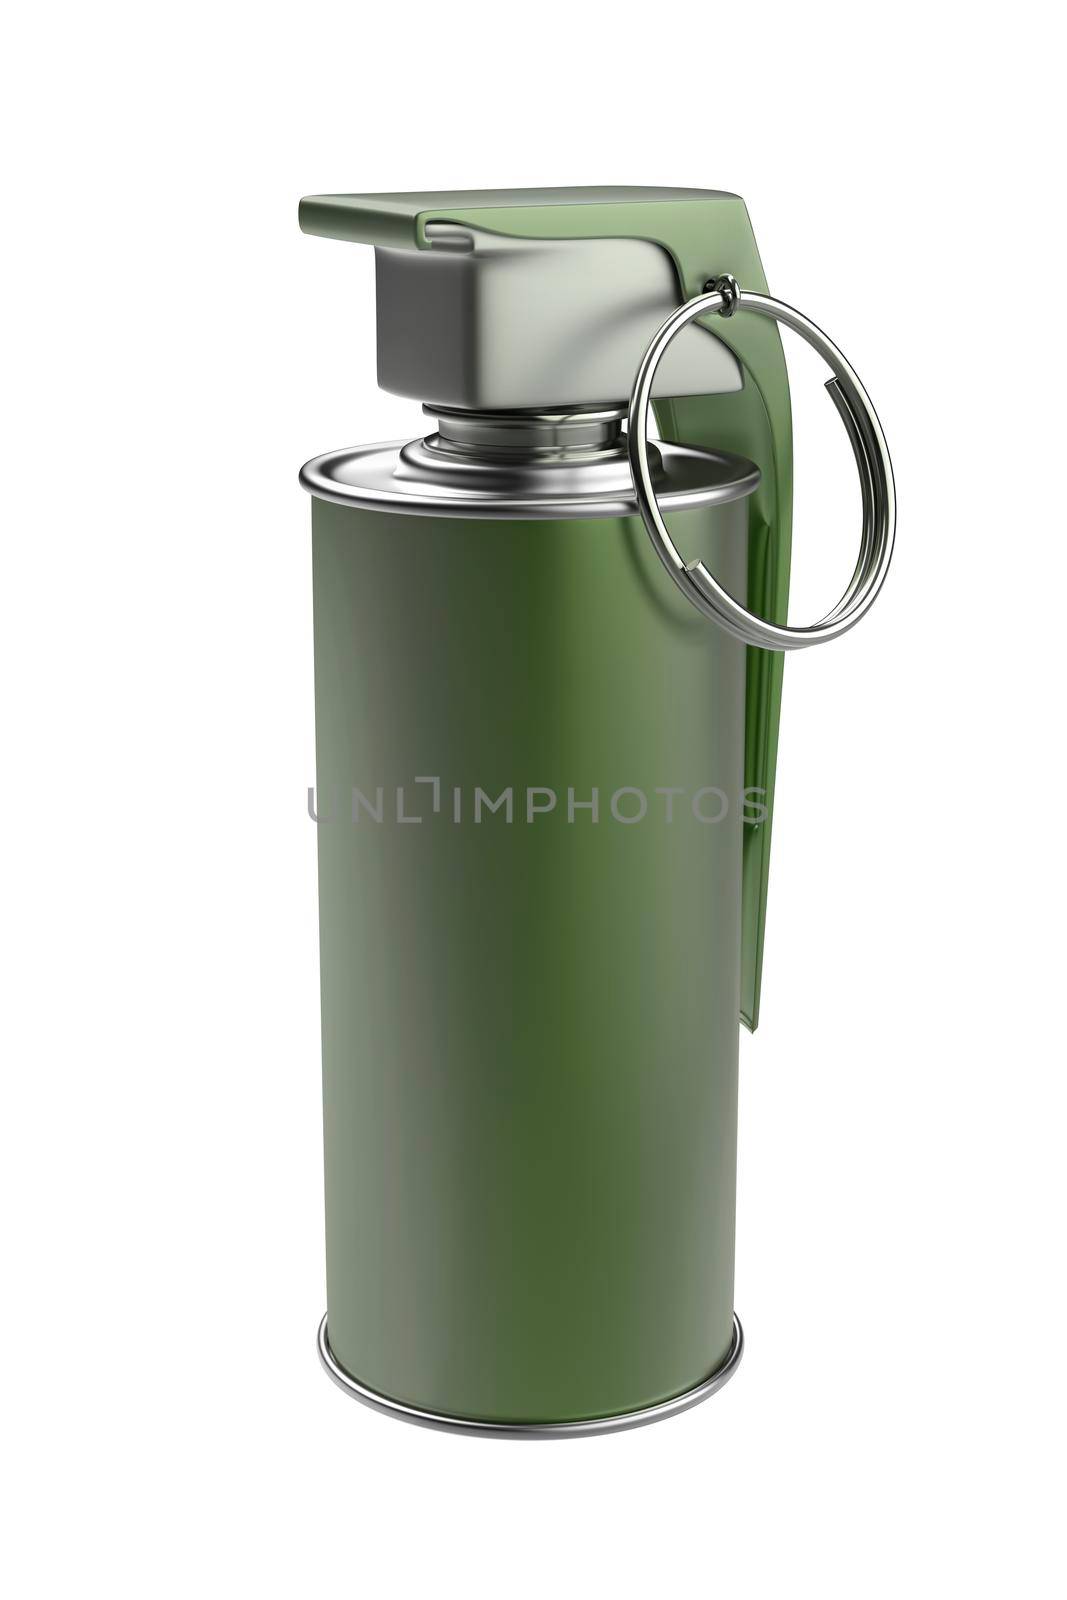 Military smoke grenade by magraphics